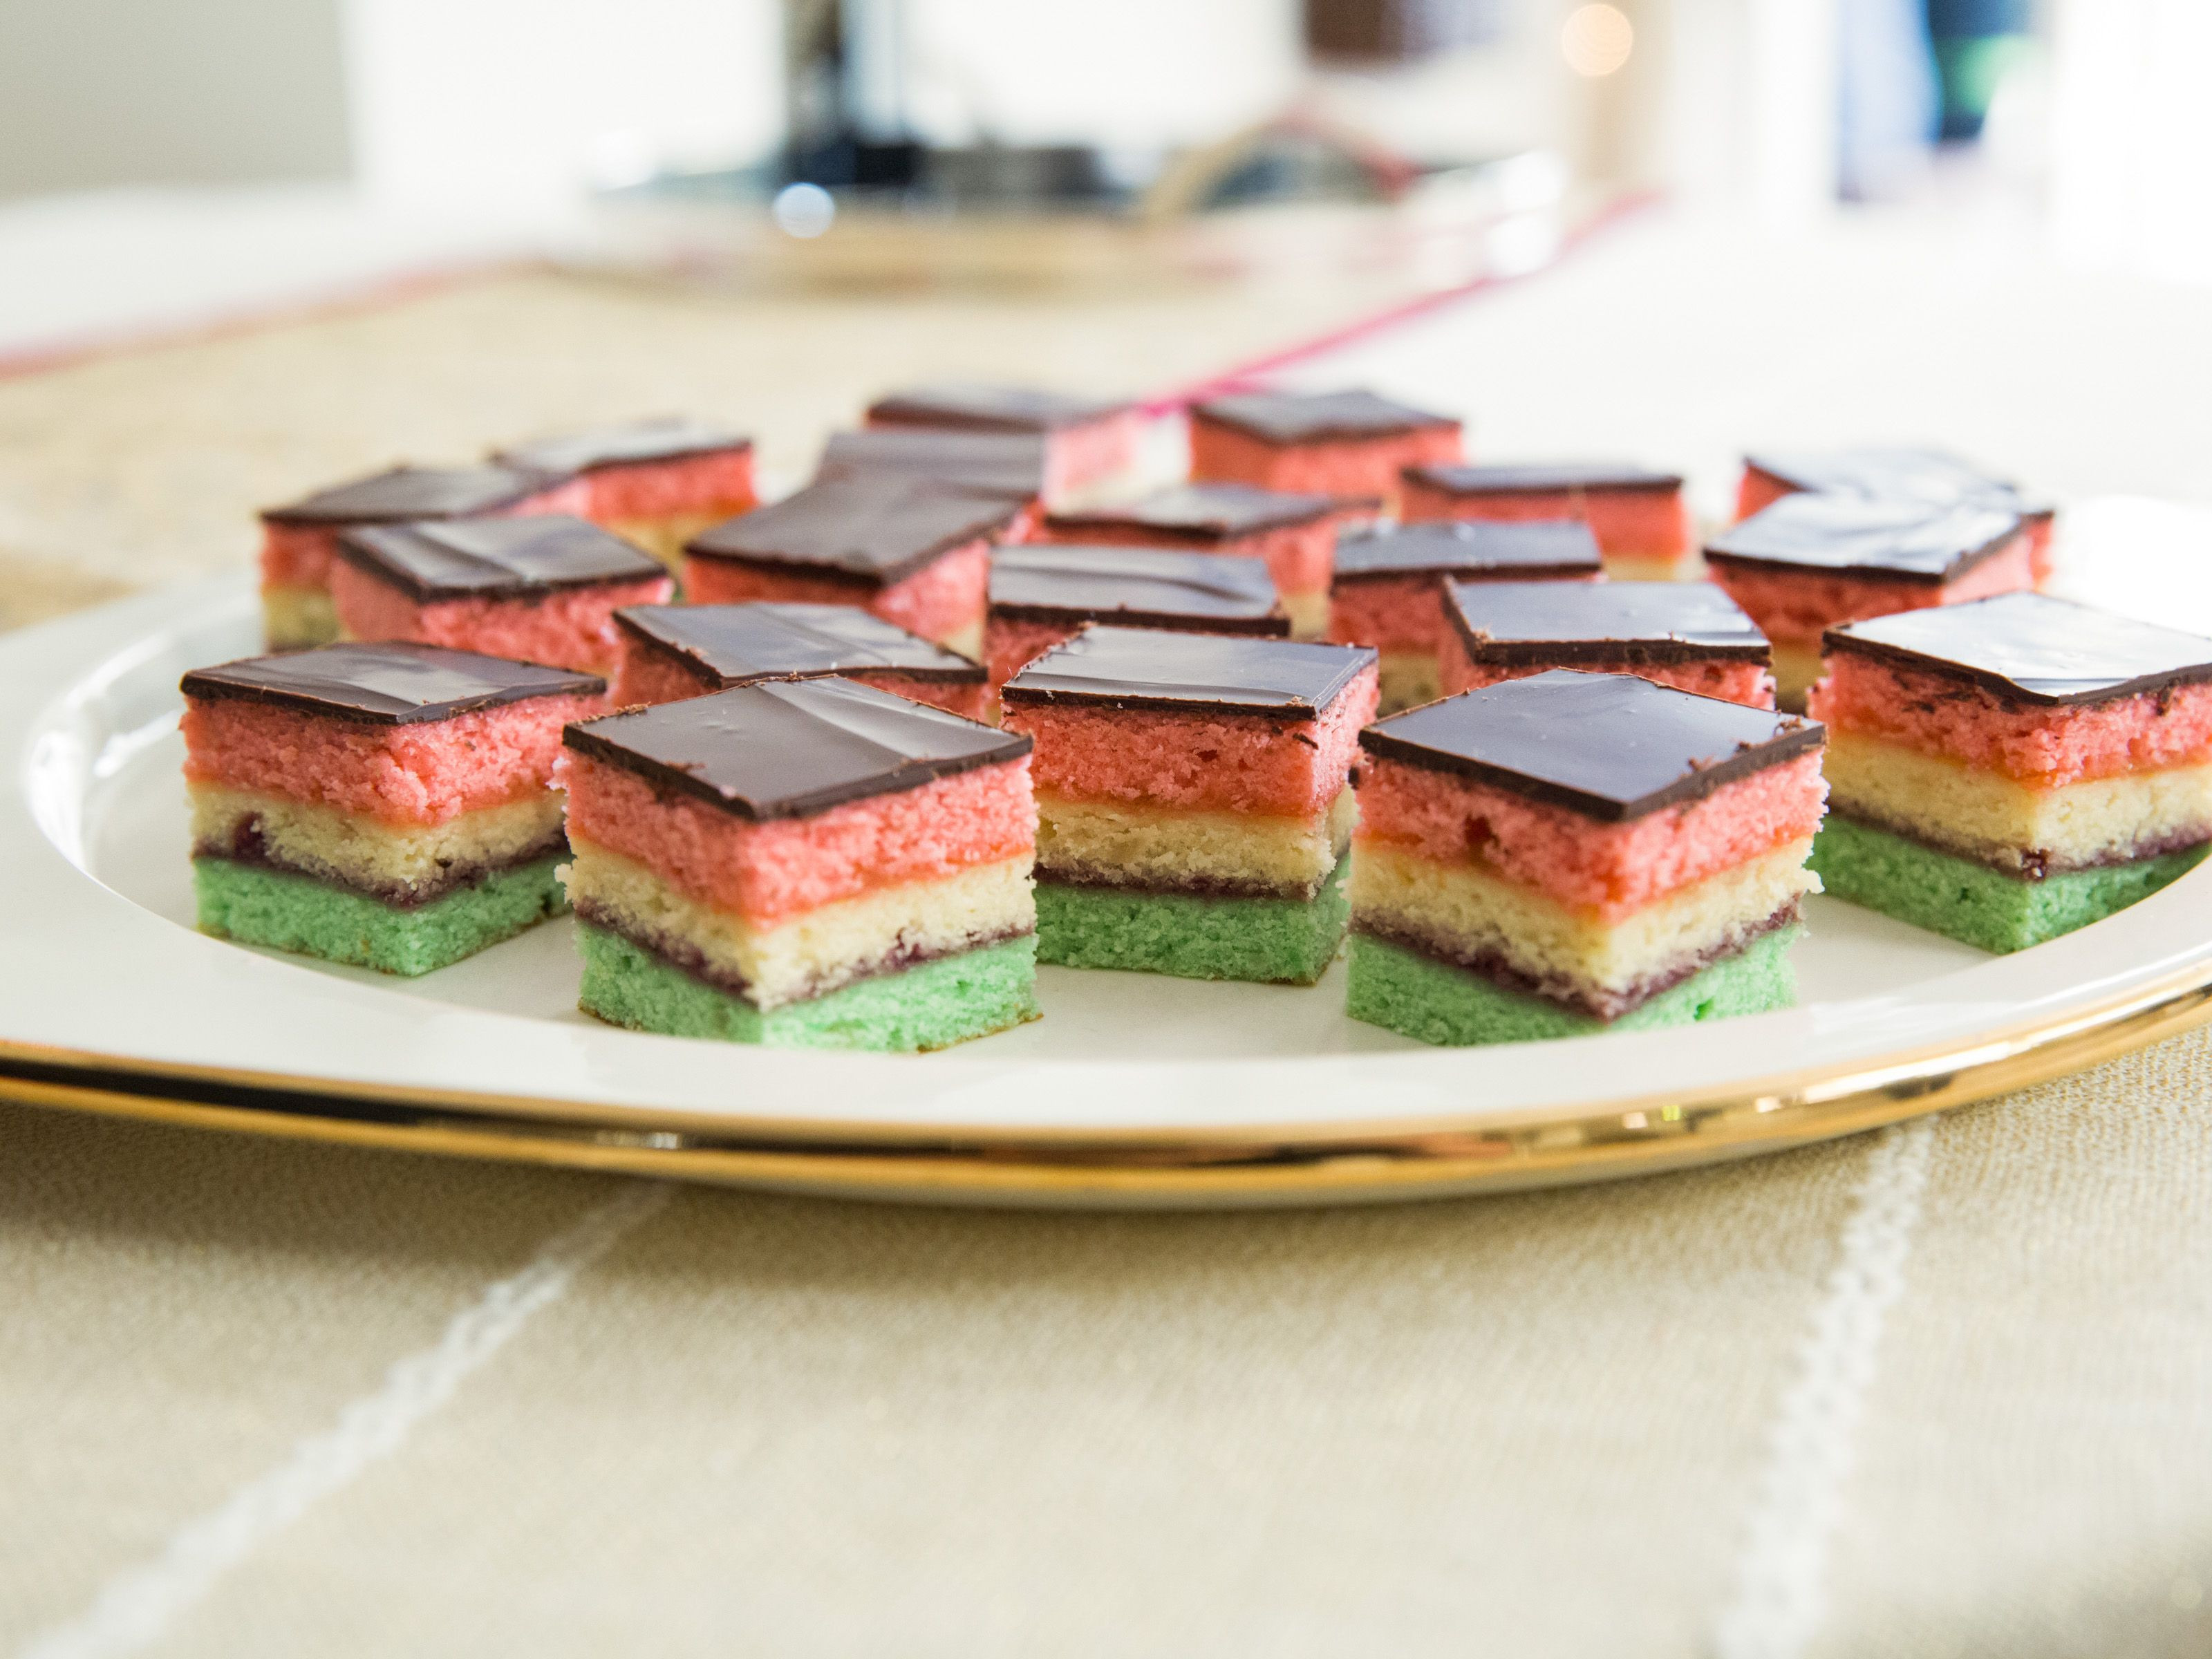 Food Network Christmas Desserts
 Neapolitan Holiday Cookies Recipe in 2019